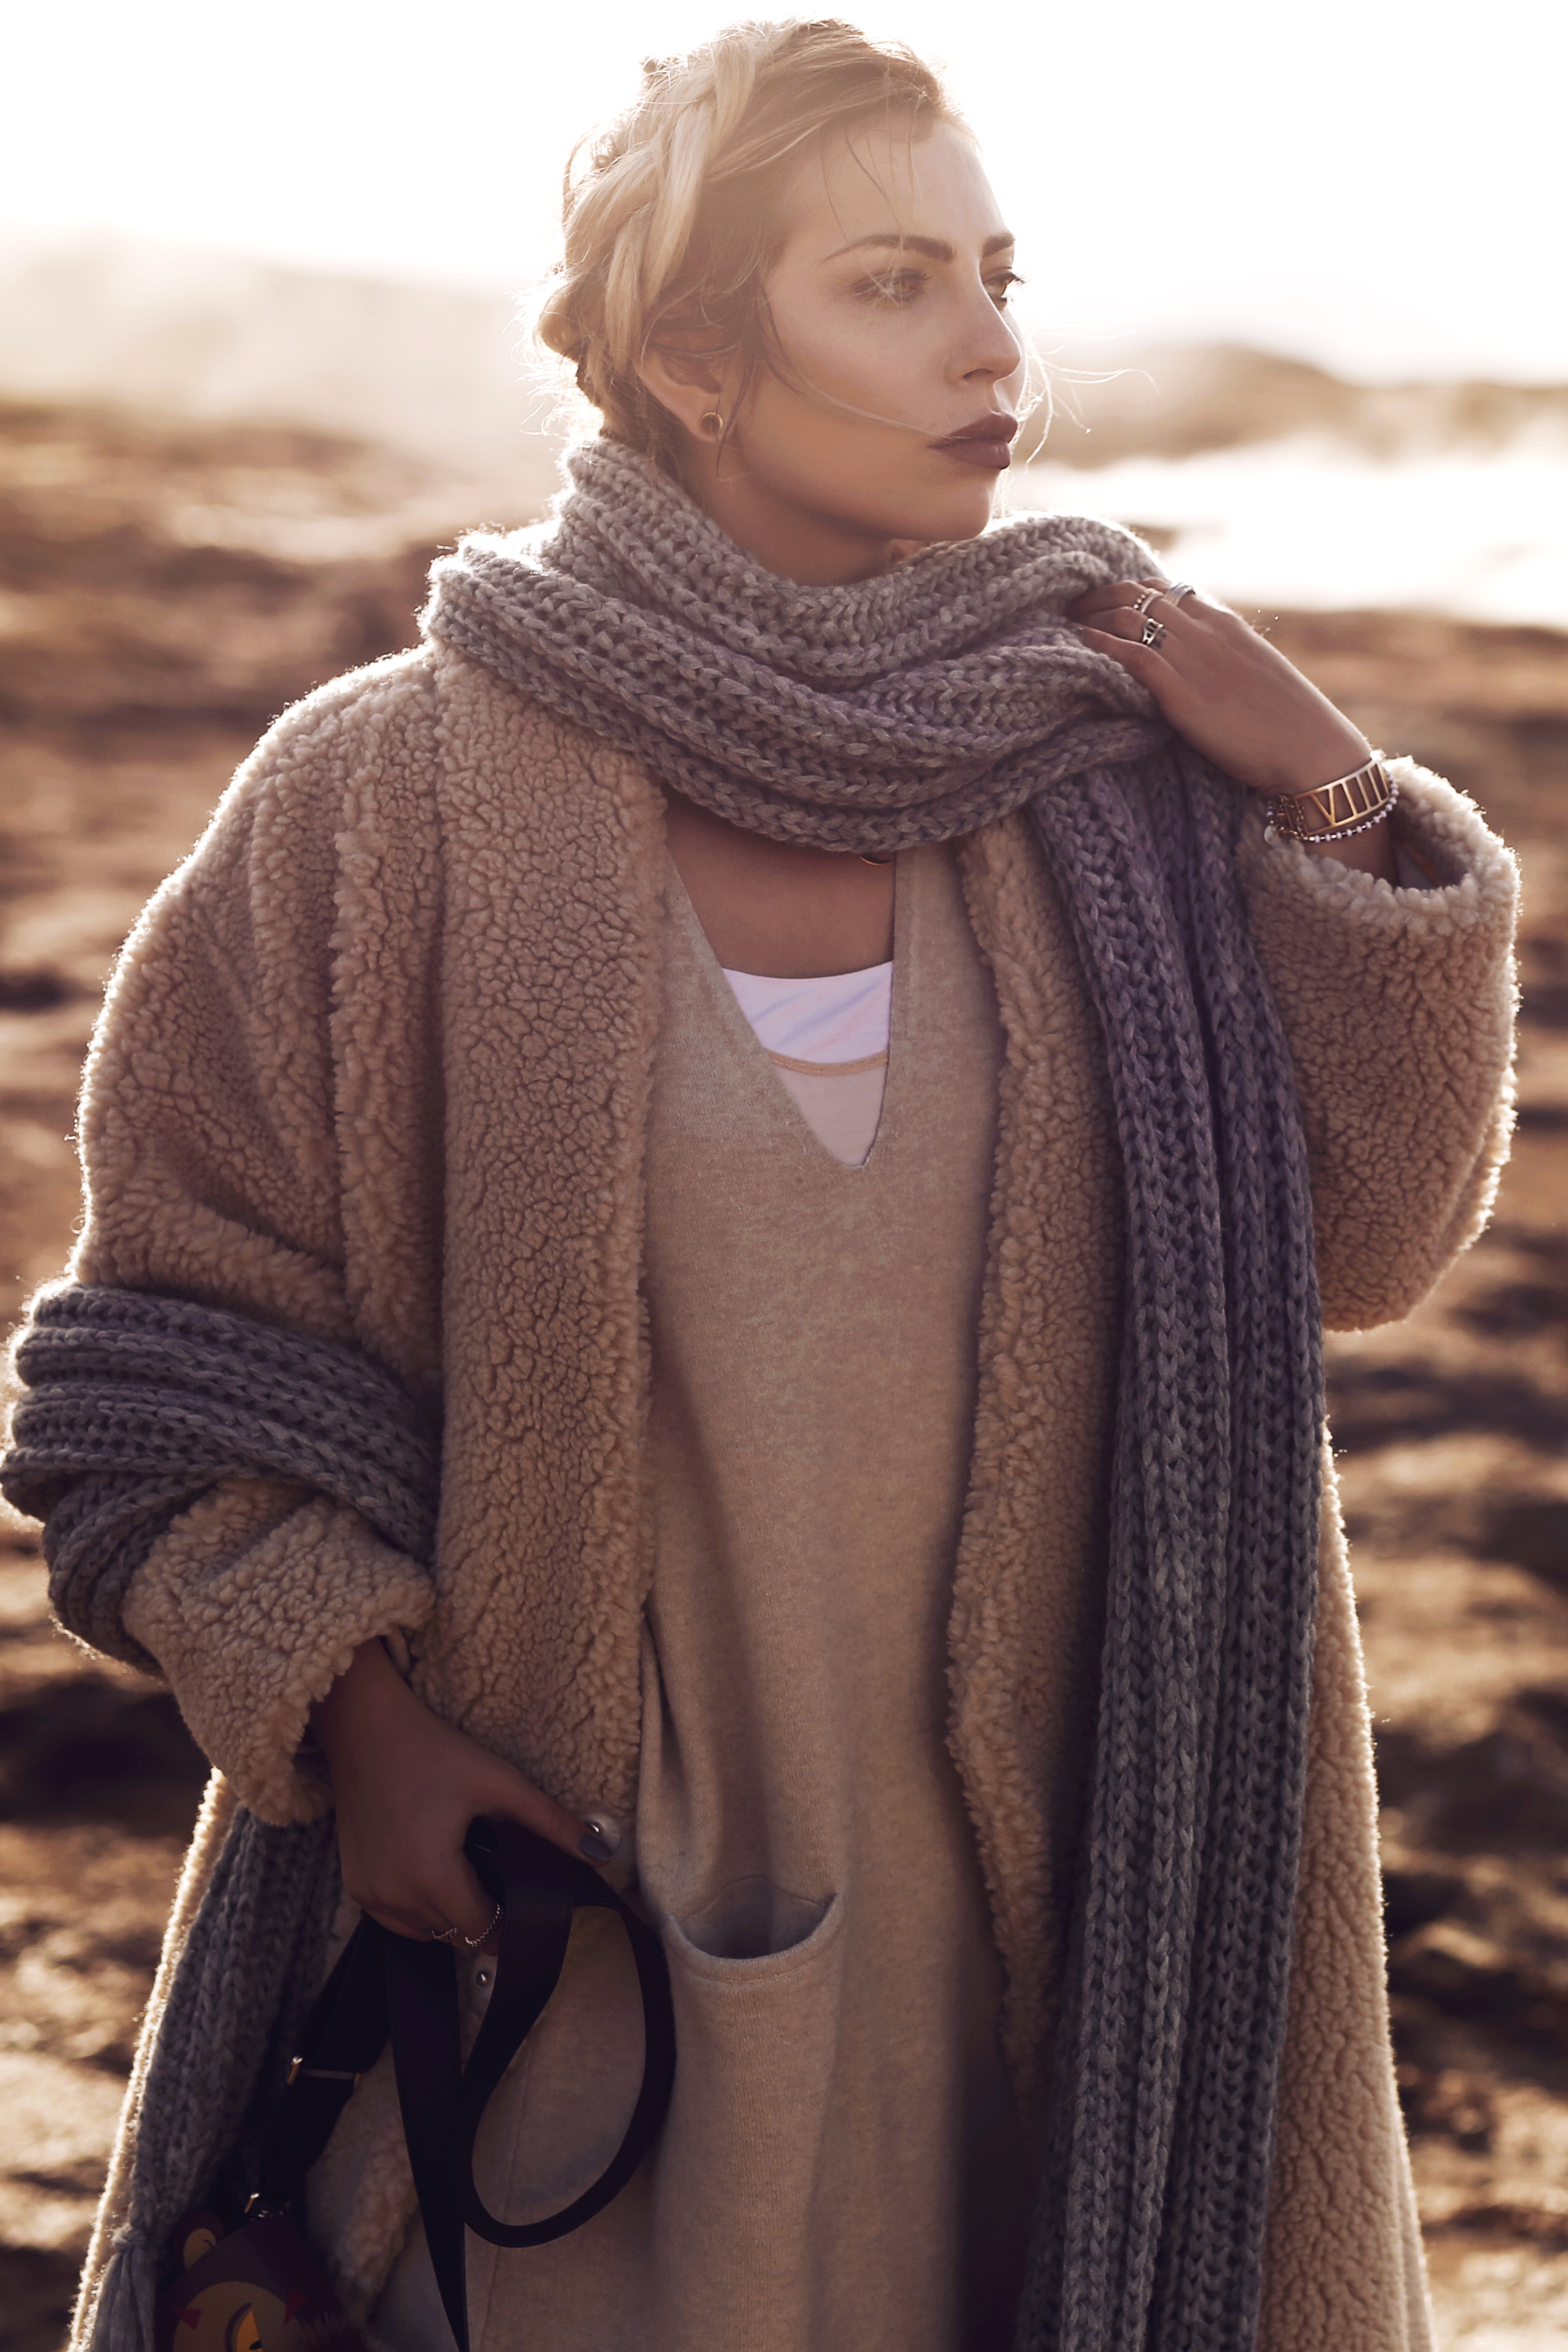 Iceland Fashion Editorial Shooting | outfit style: winter, long shearling coat, casual, comfy, light, warm, cashmere